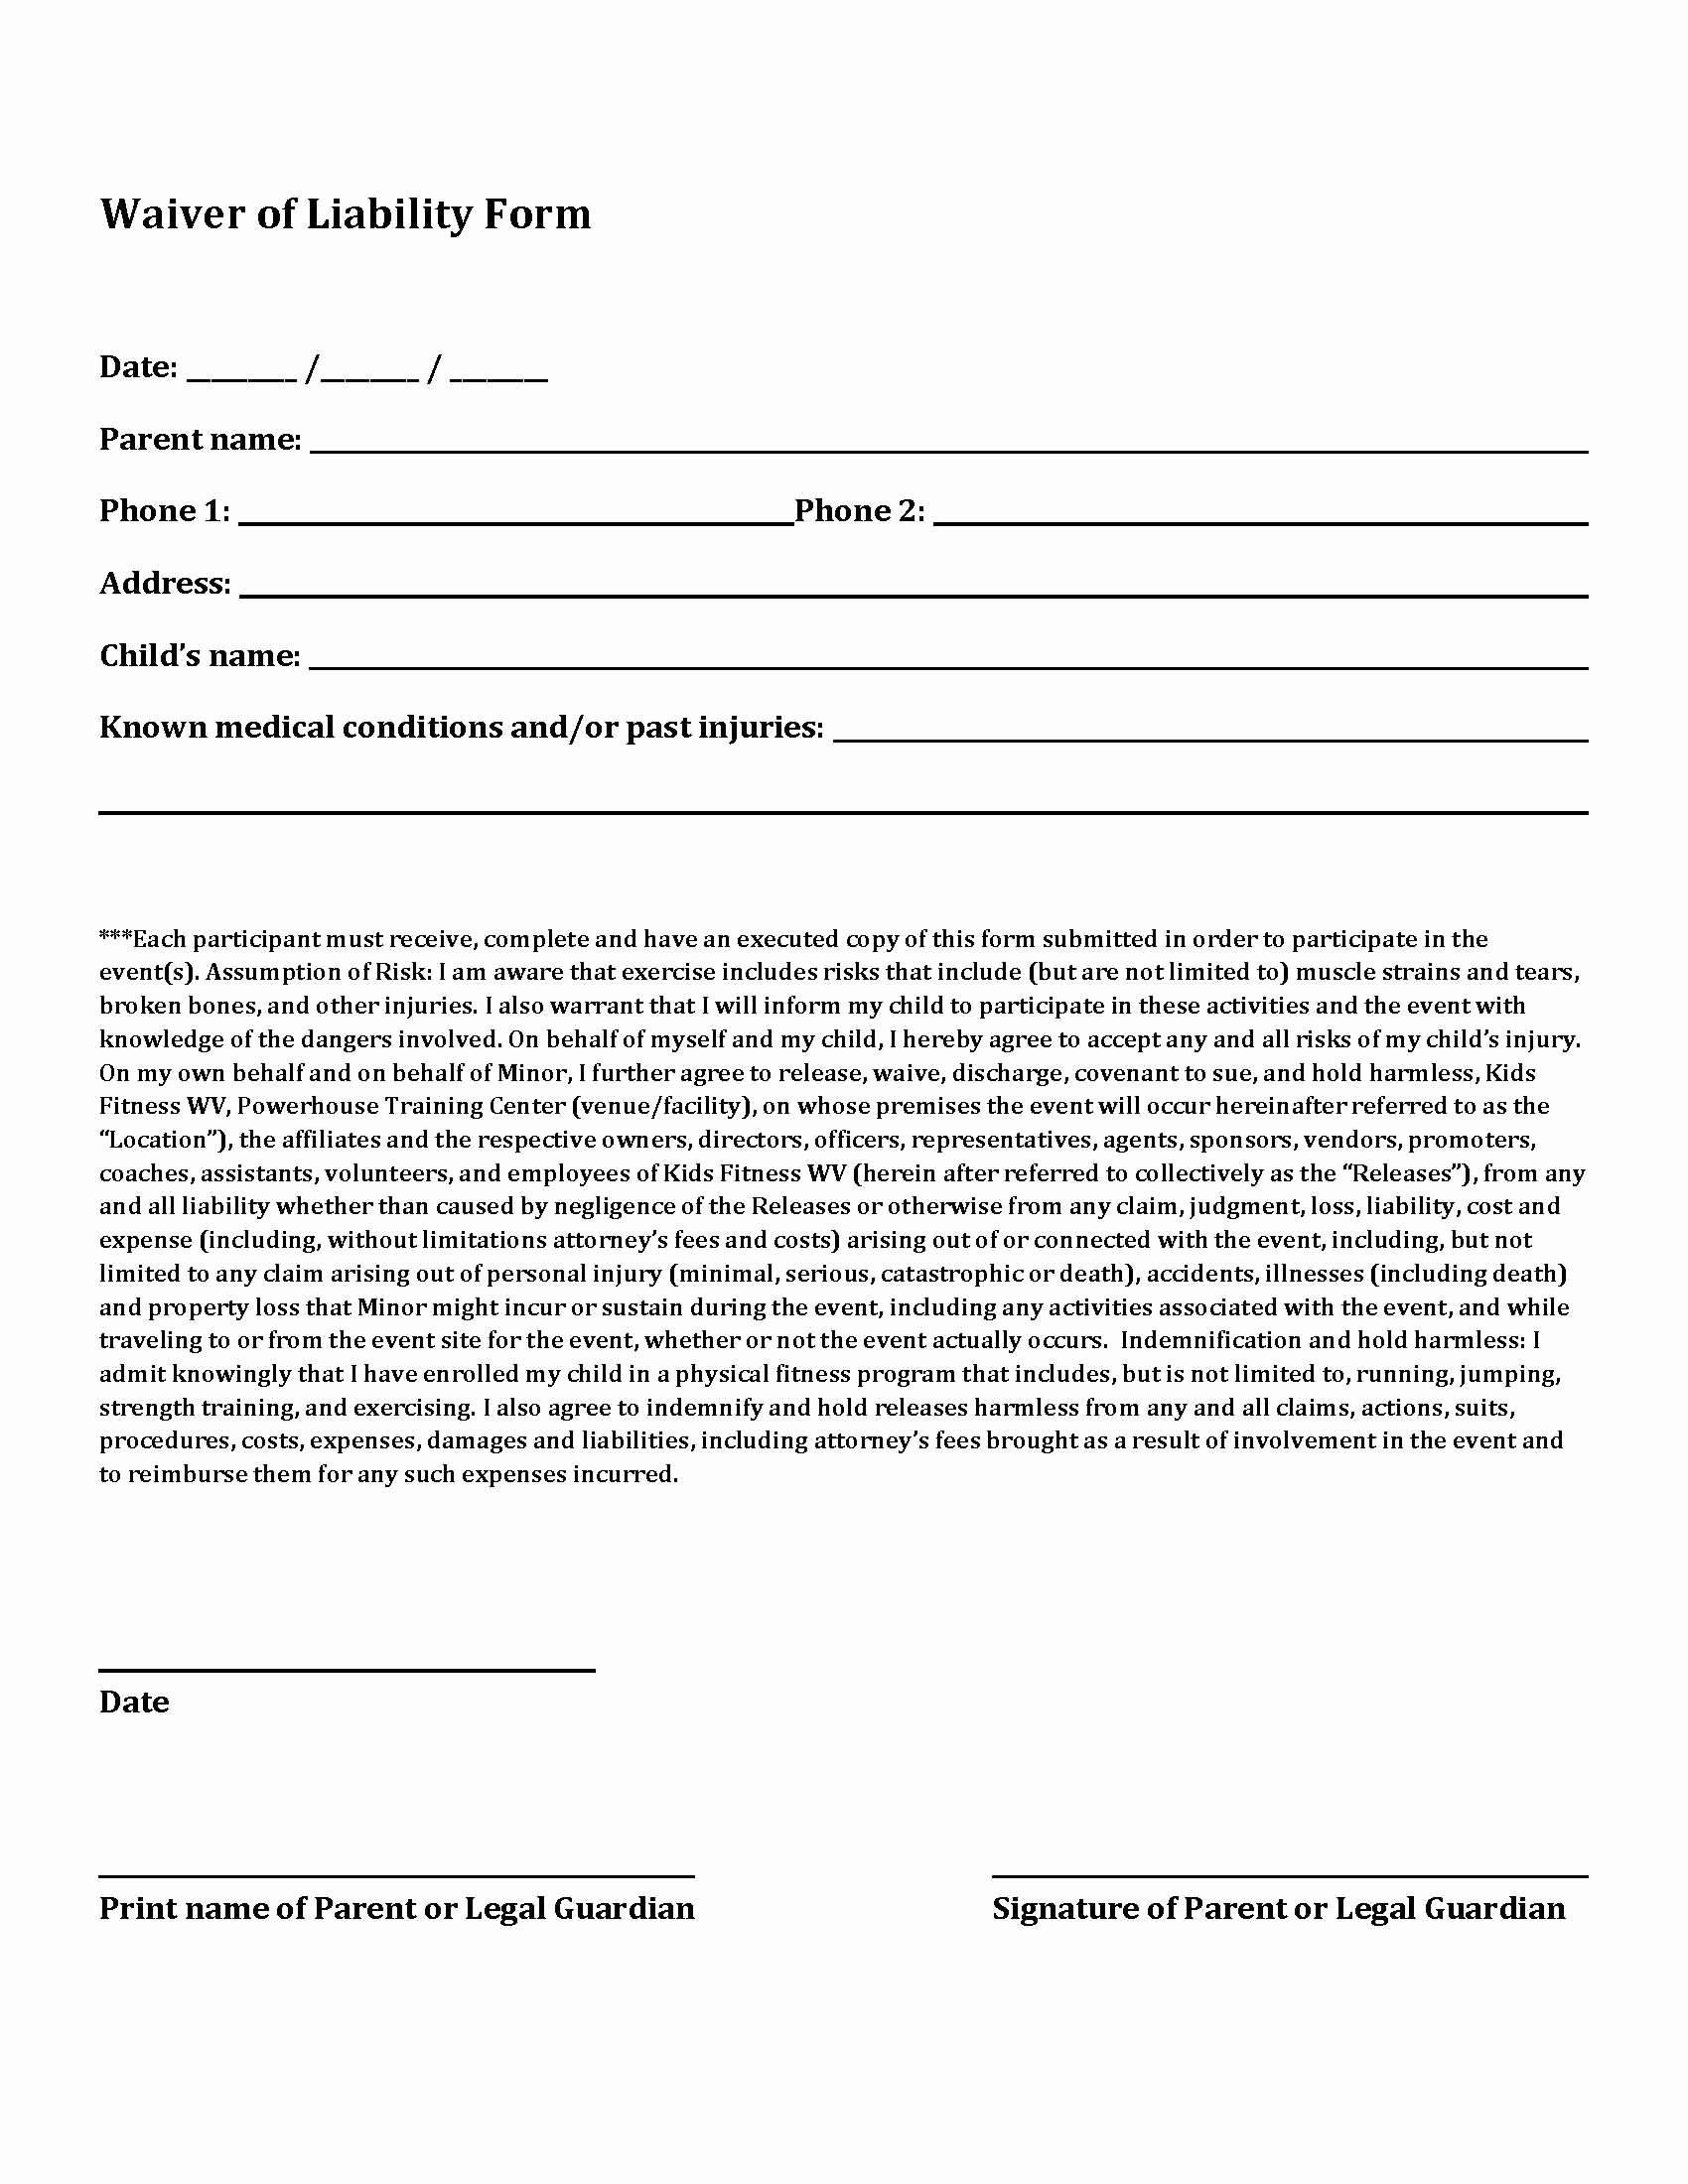 Waiver form Template for Sports Inspirational Team Extreme Waiver form Announcements